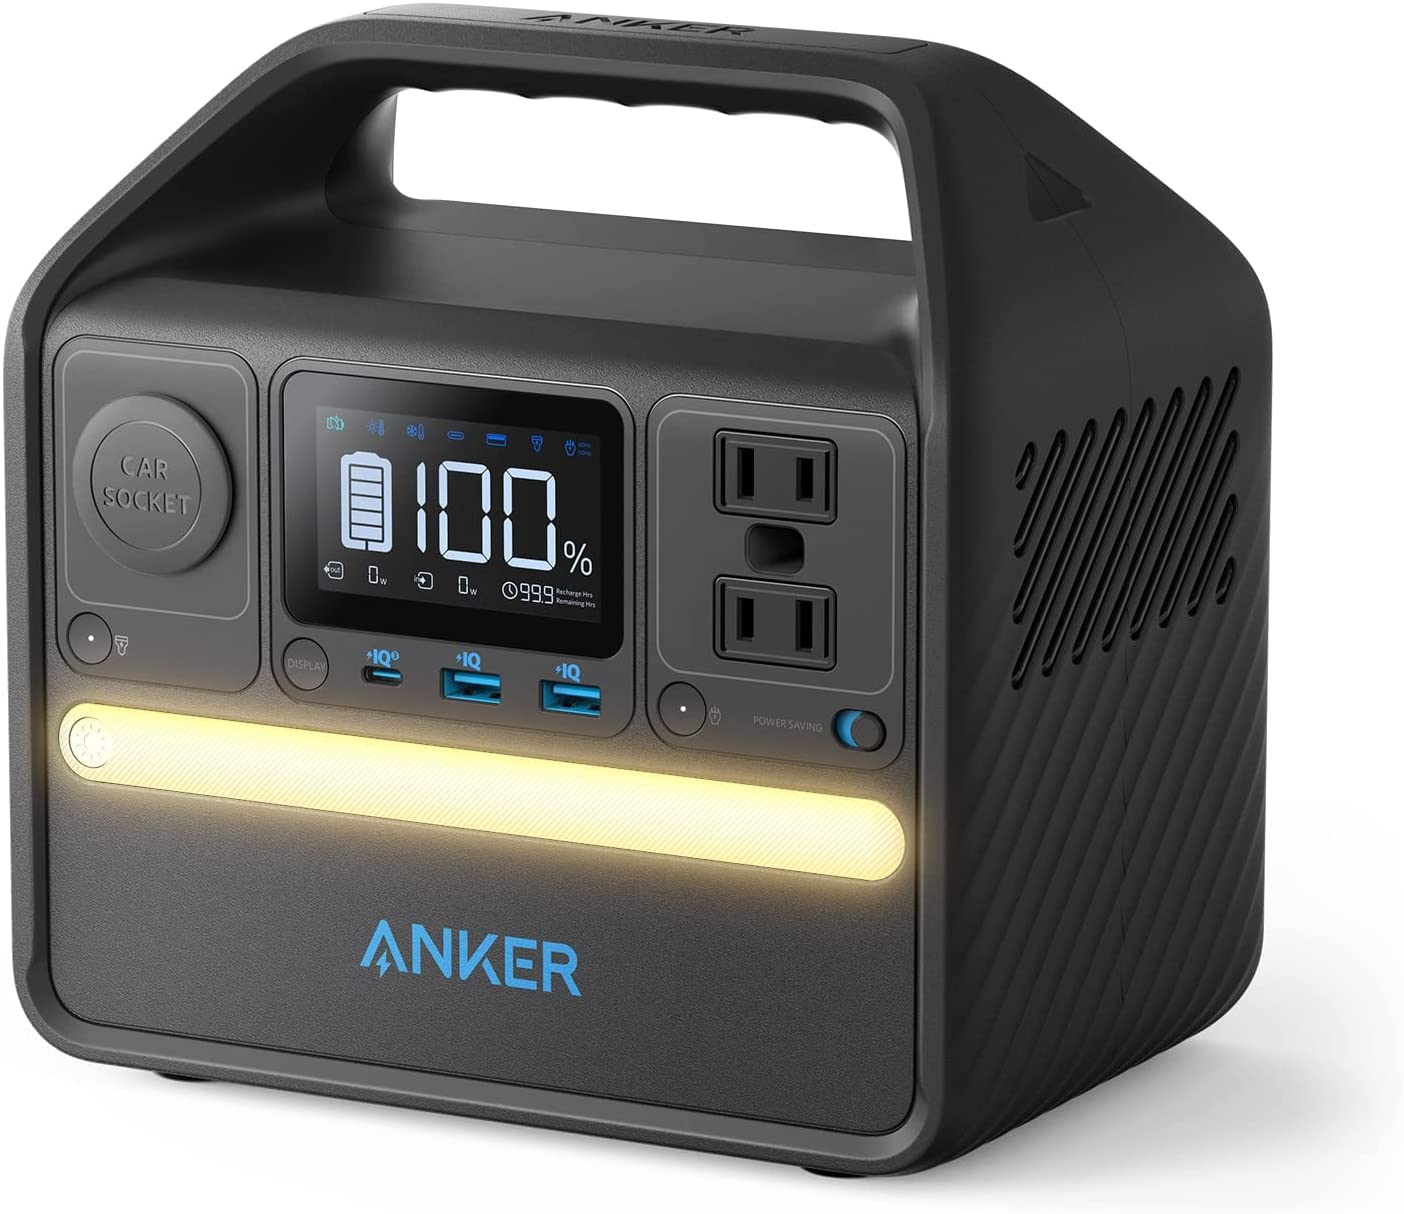 Anker 200W/256Wh LiFePO4 Portable Power Station $186.99 + Free Shipping